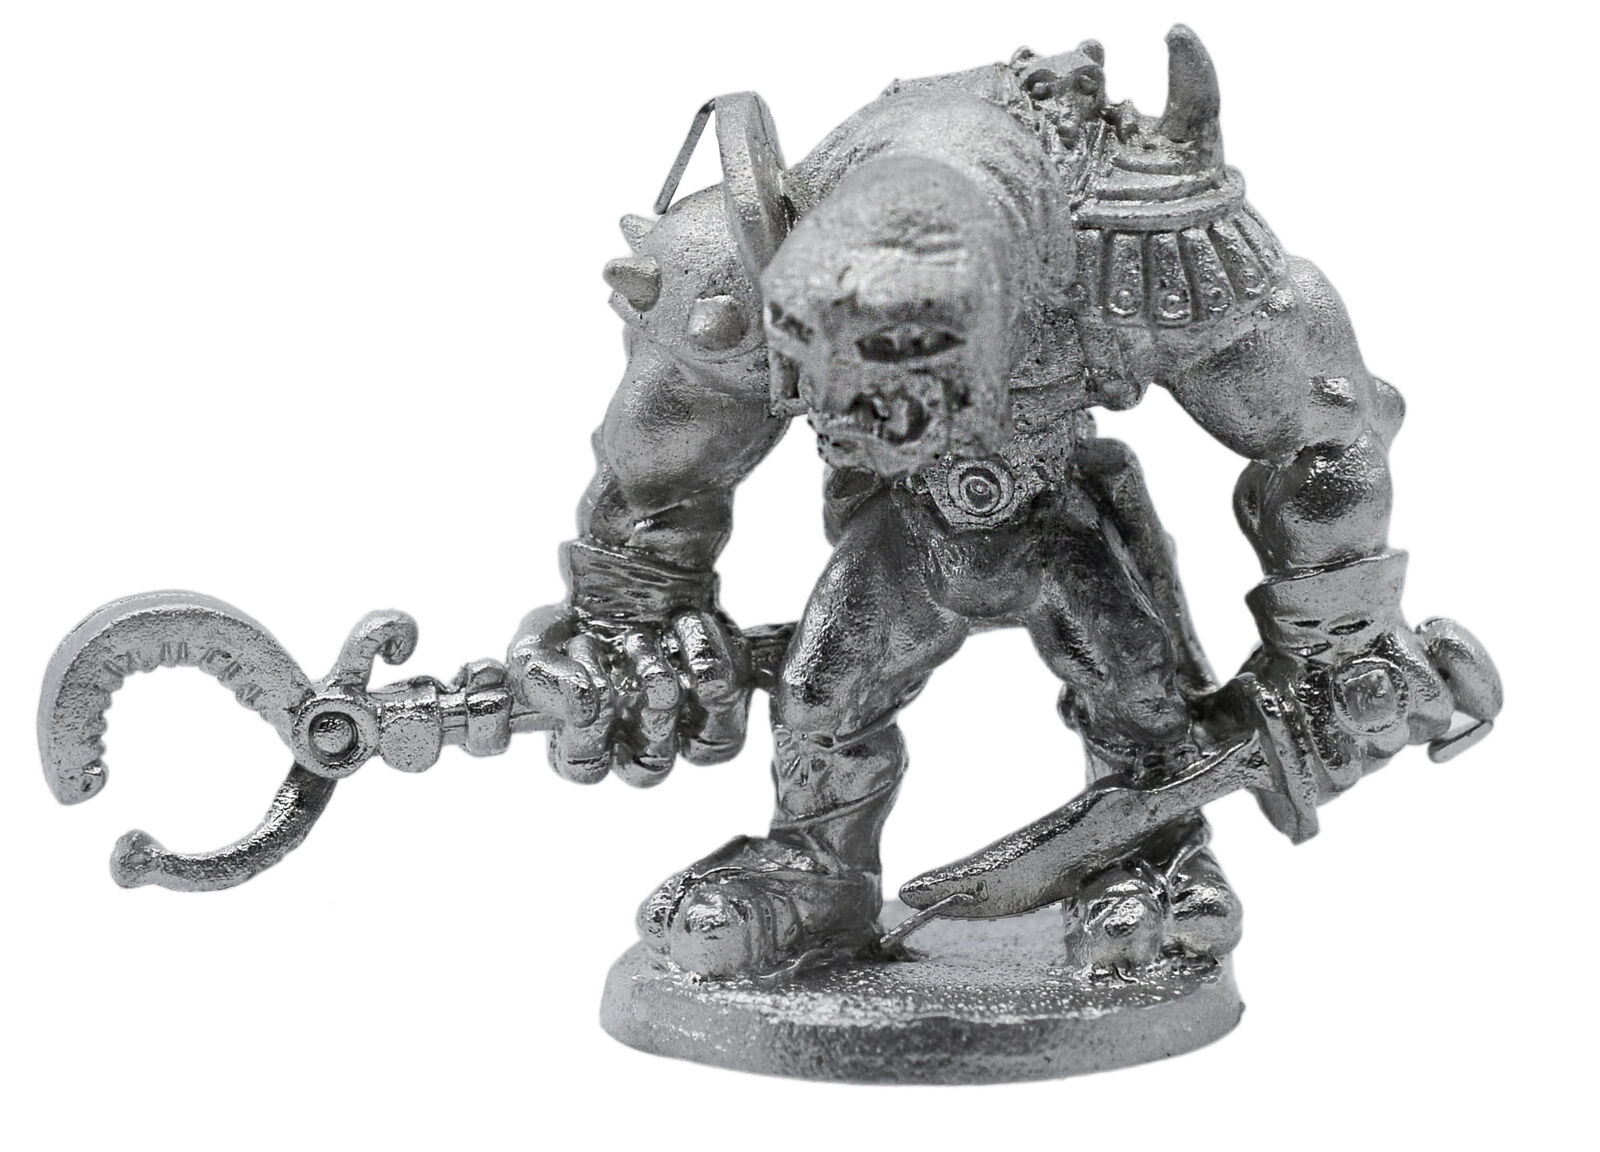 Orc Pain Master - 100% Lead-Free Pewter - Classic Fantasy Miniatures for 28mm